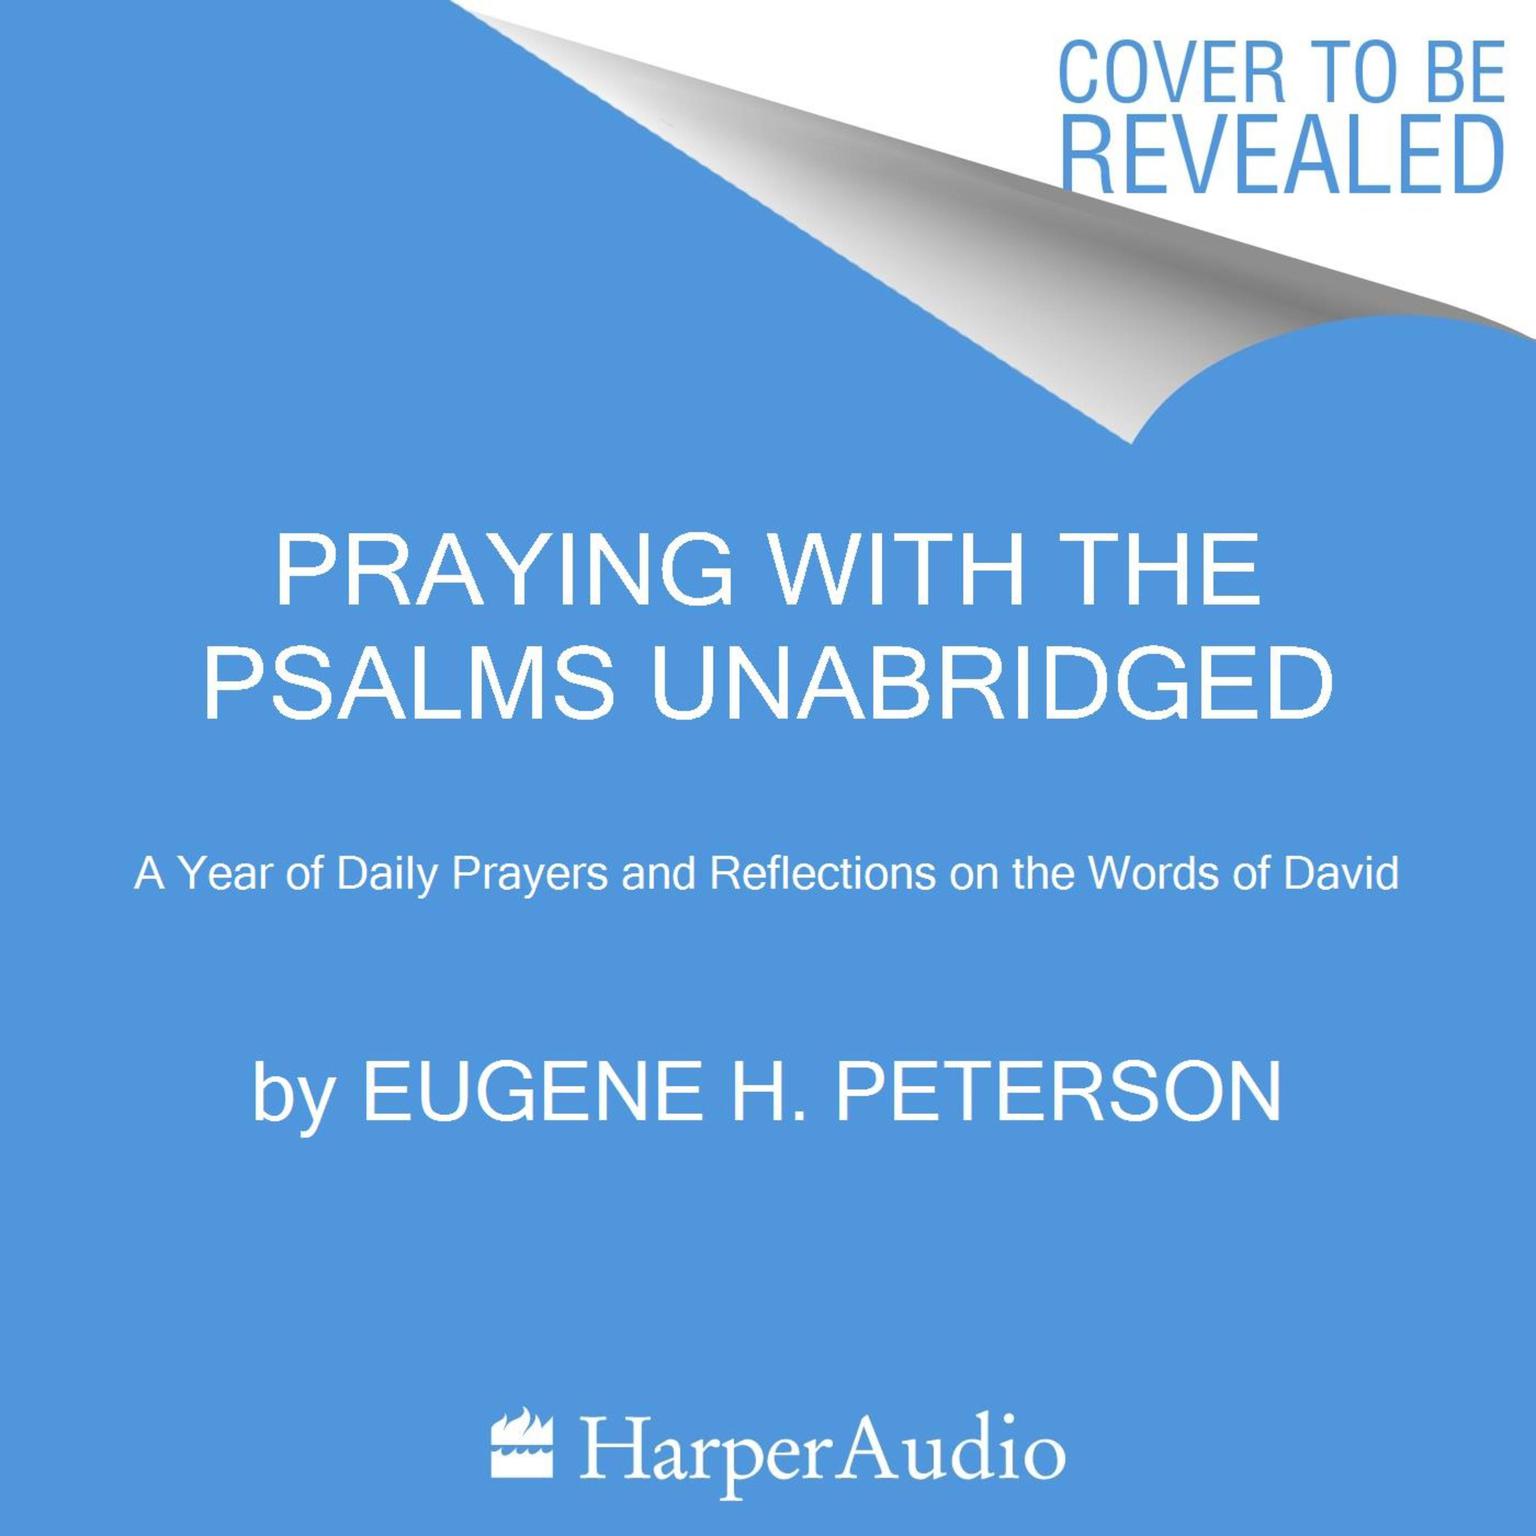 Praying with the Psalms: A Year of Daily Prayers and Reflections on the Words of David Audiobook, by Eugene H. Peterson